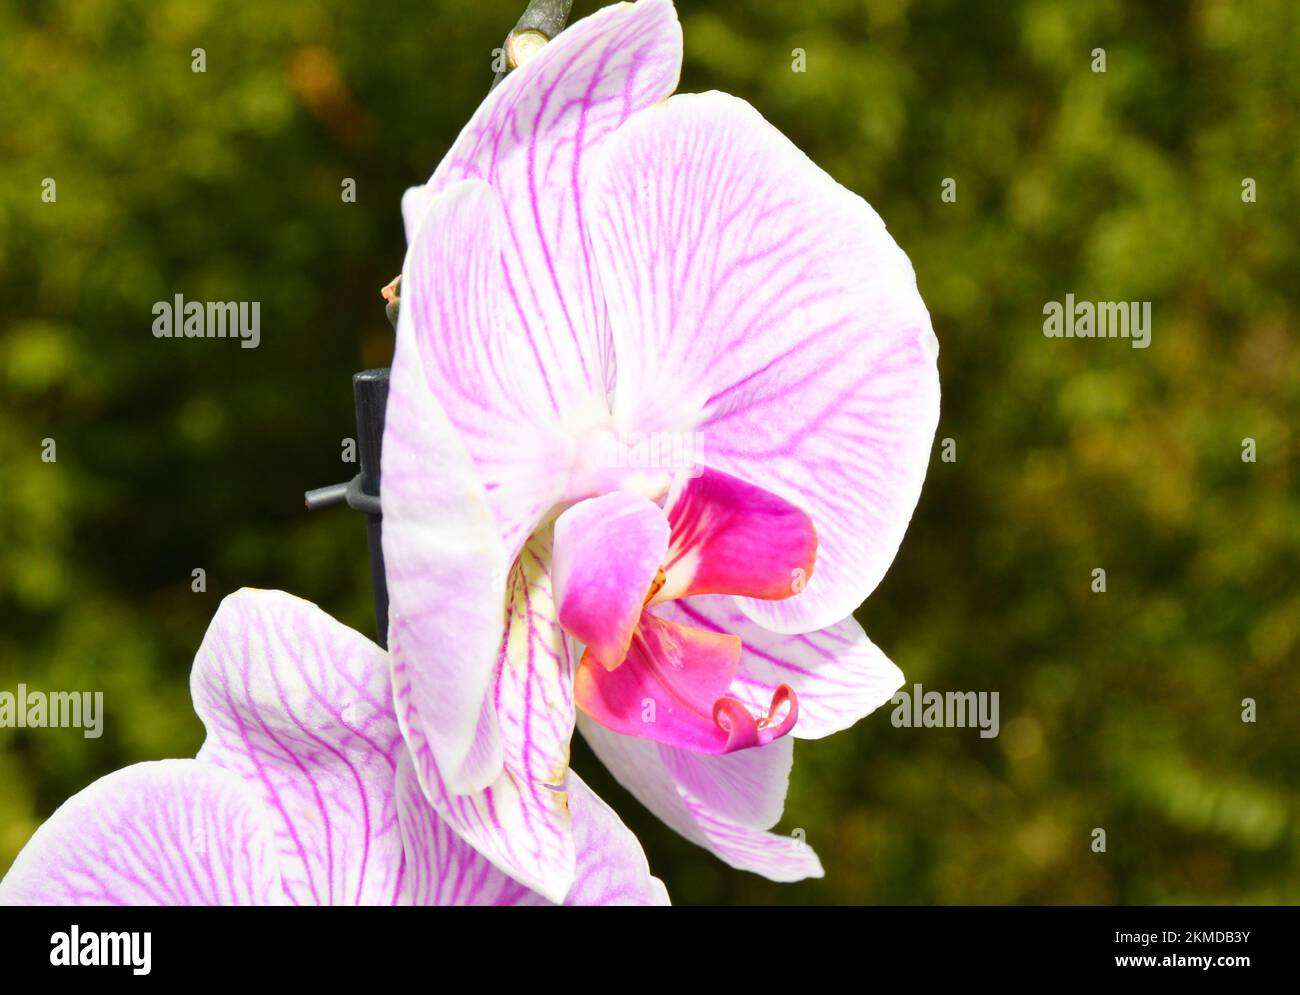 Orchid flower (Lat. Orchidaceae) or Phalaenopsis (Lat. Phalaenopsis) white-purple color in summer Stock Photo